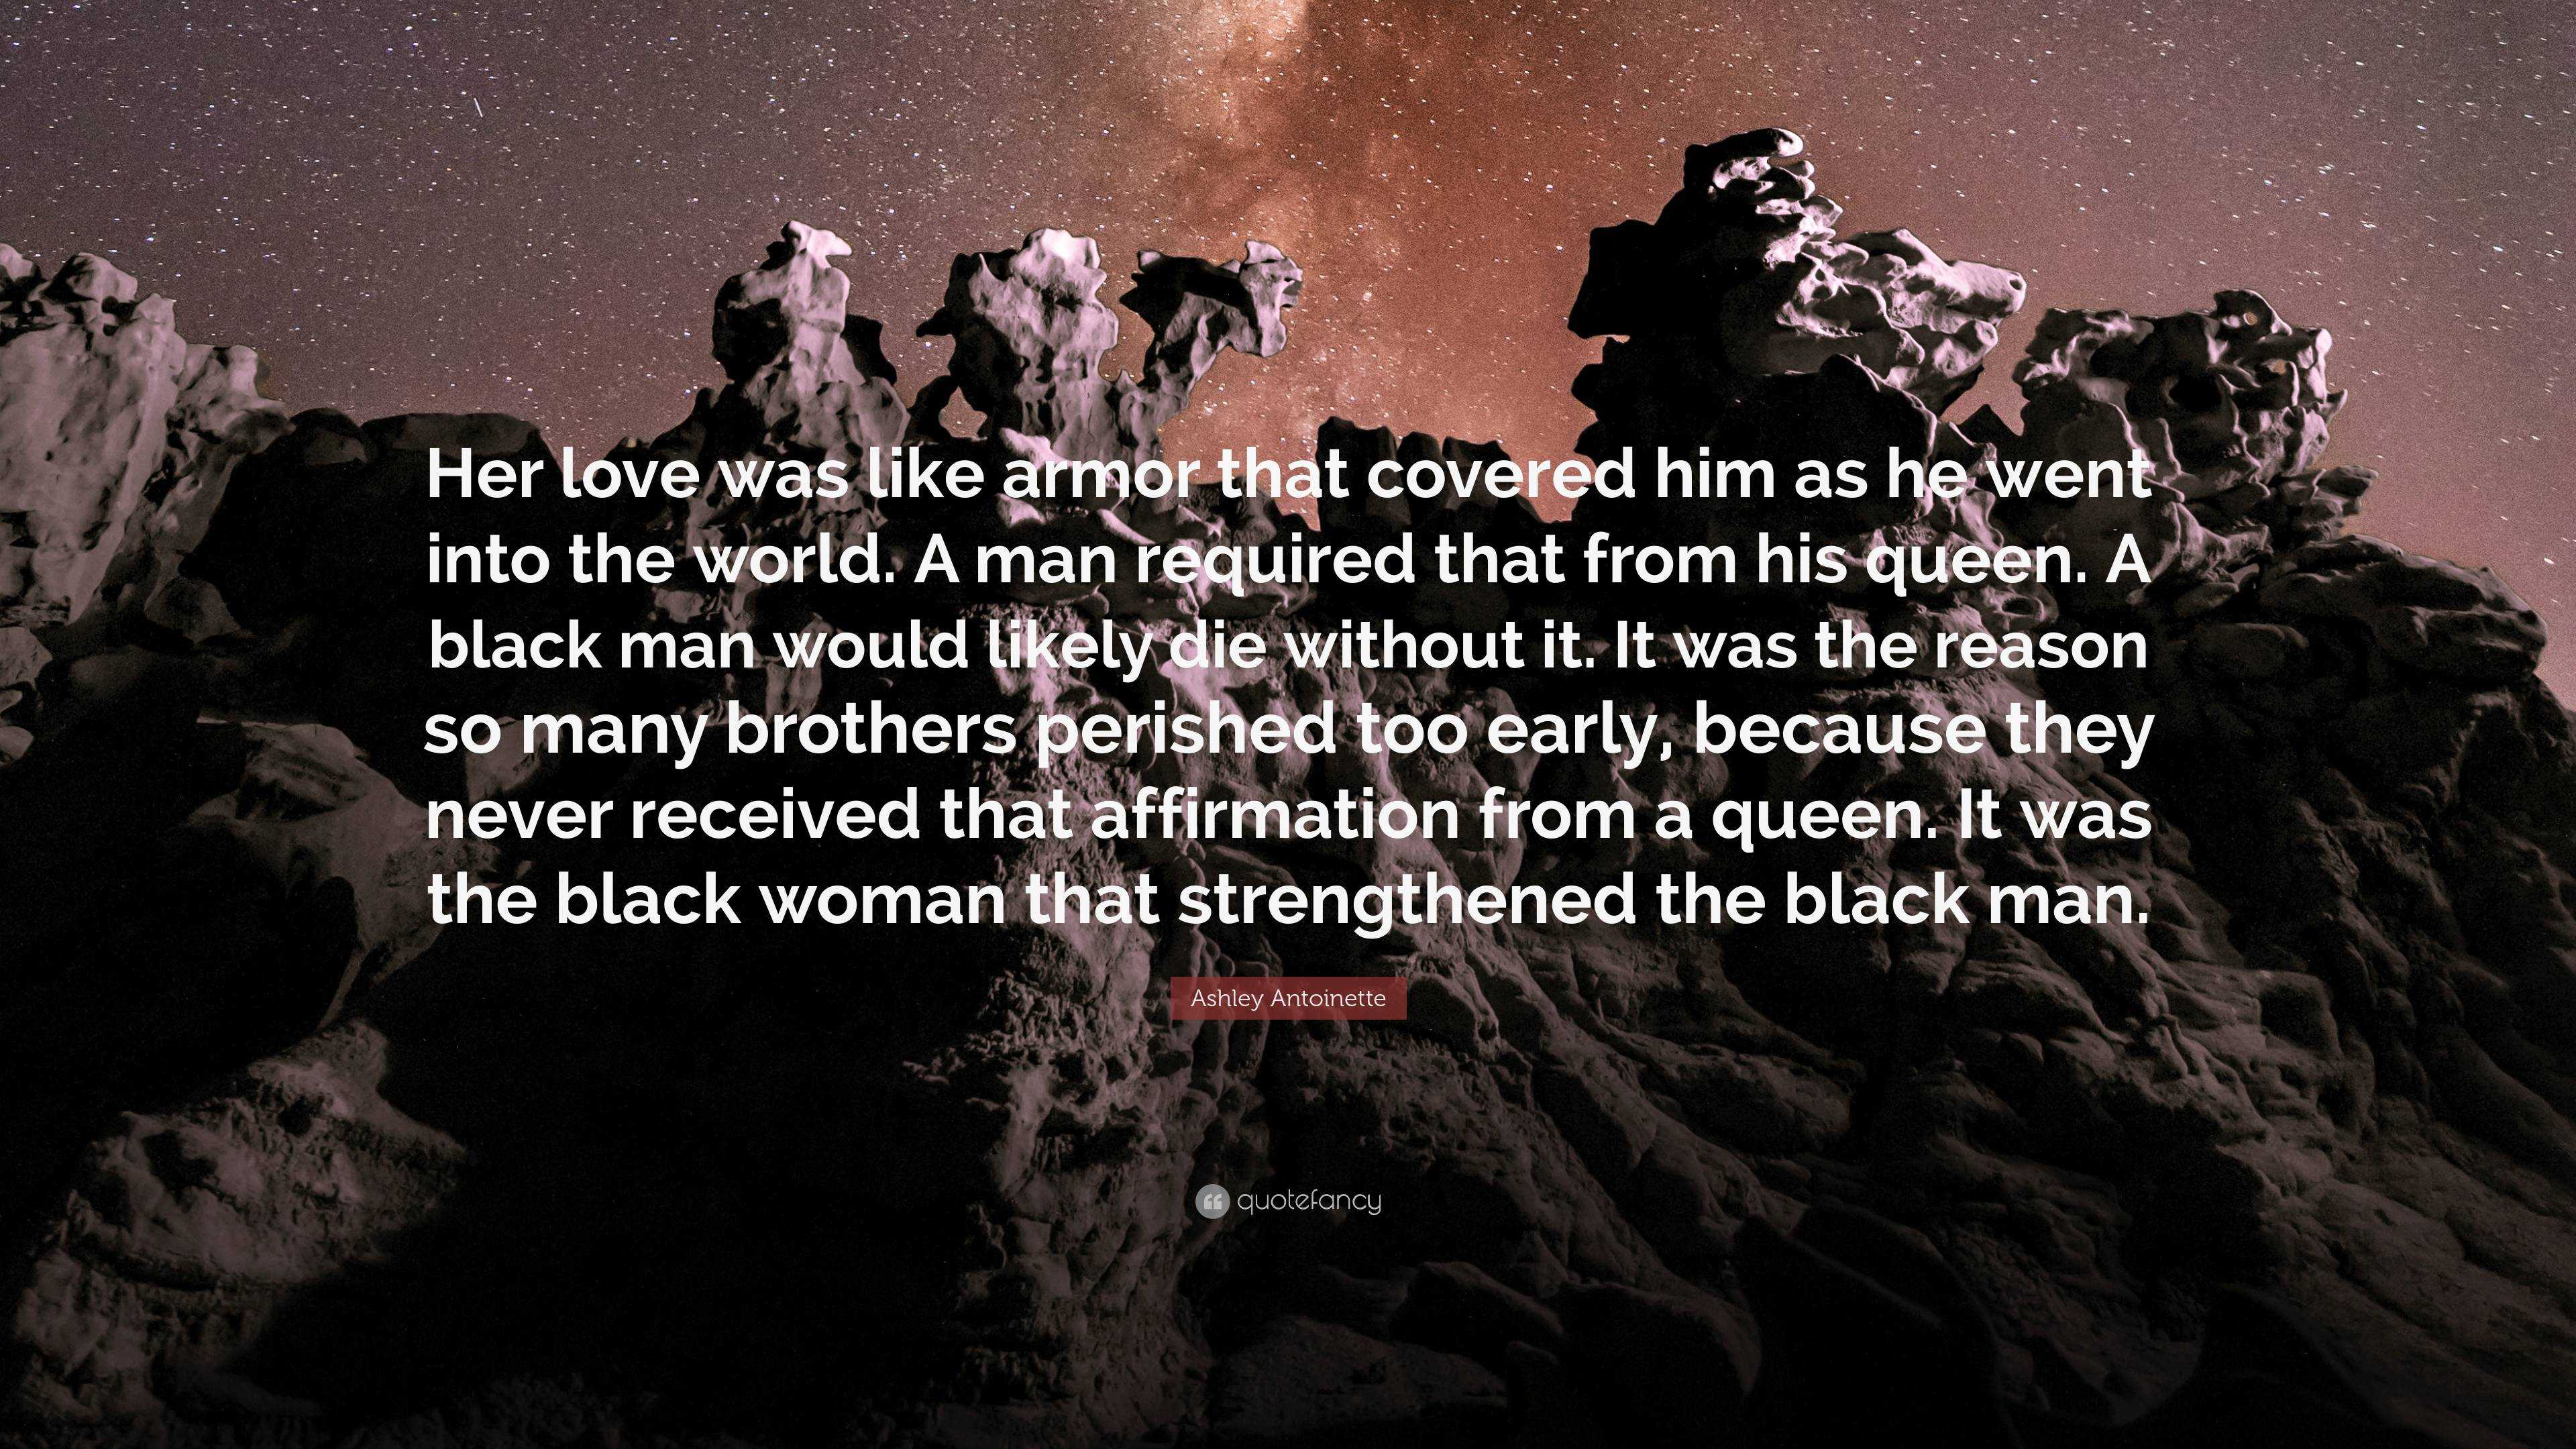 Ashley Antoinette Quote: “Her love was like armor that covered him as he  went into the world. A man required that from his queen. A black man  woul...”